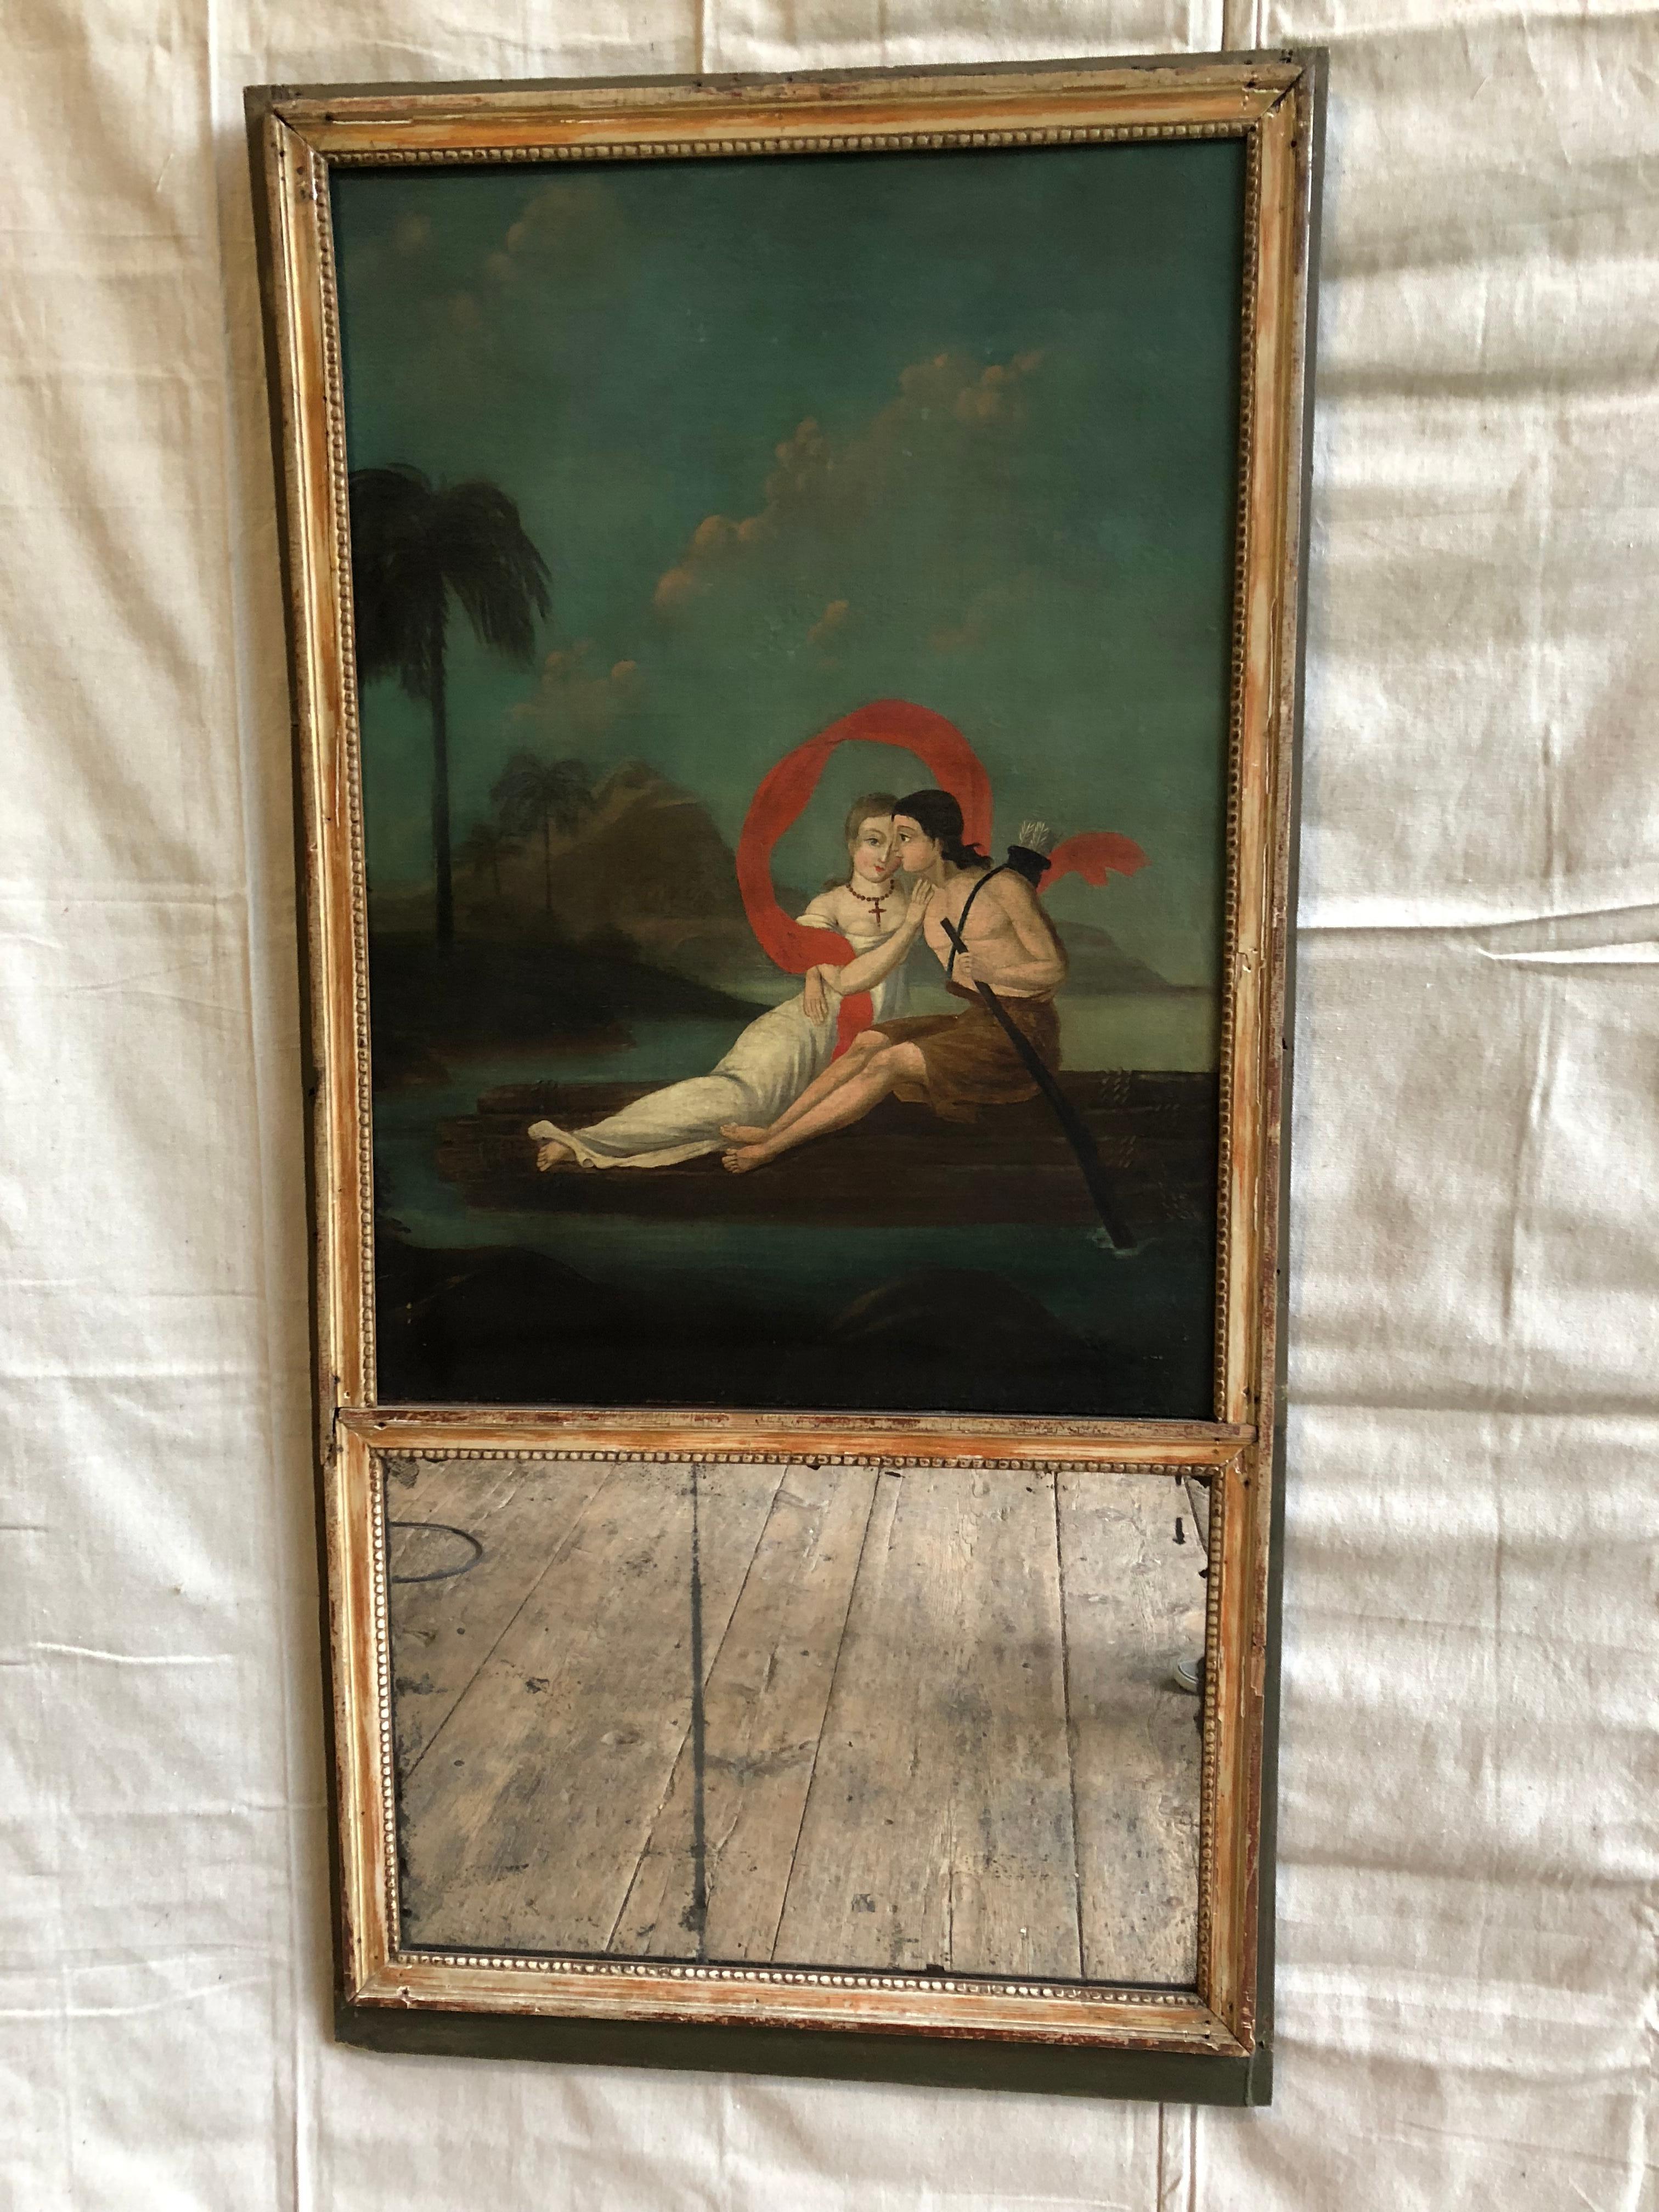 A charming French Trumeau mirror with painted panel above, depicting an allegory of the conversion of American natives to Christianity. The painting shows a Christian woman and a native man in a loving repose on a raft in a tropical setting. The